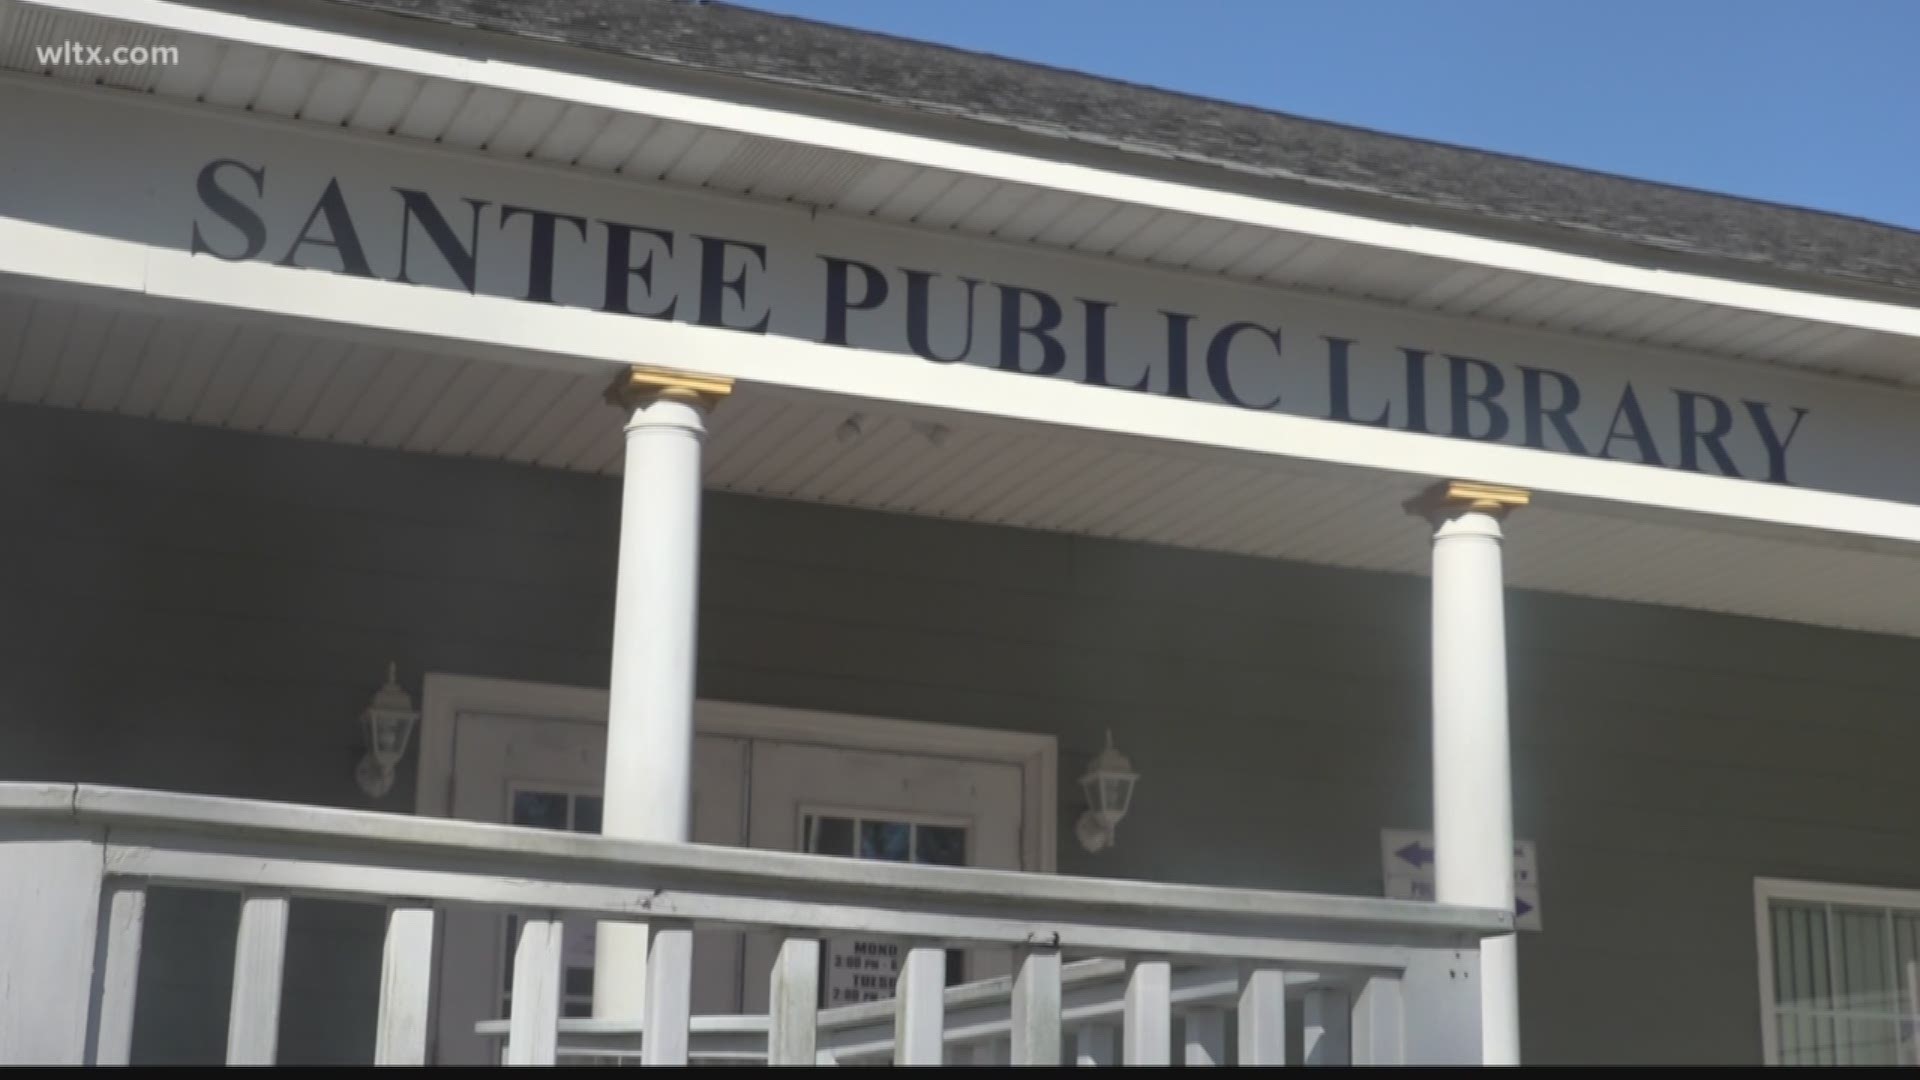 Michael Fuller was in Orangeburg County, where he addressed concerns about the hours of a library.